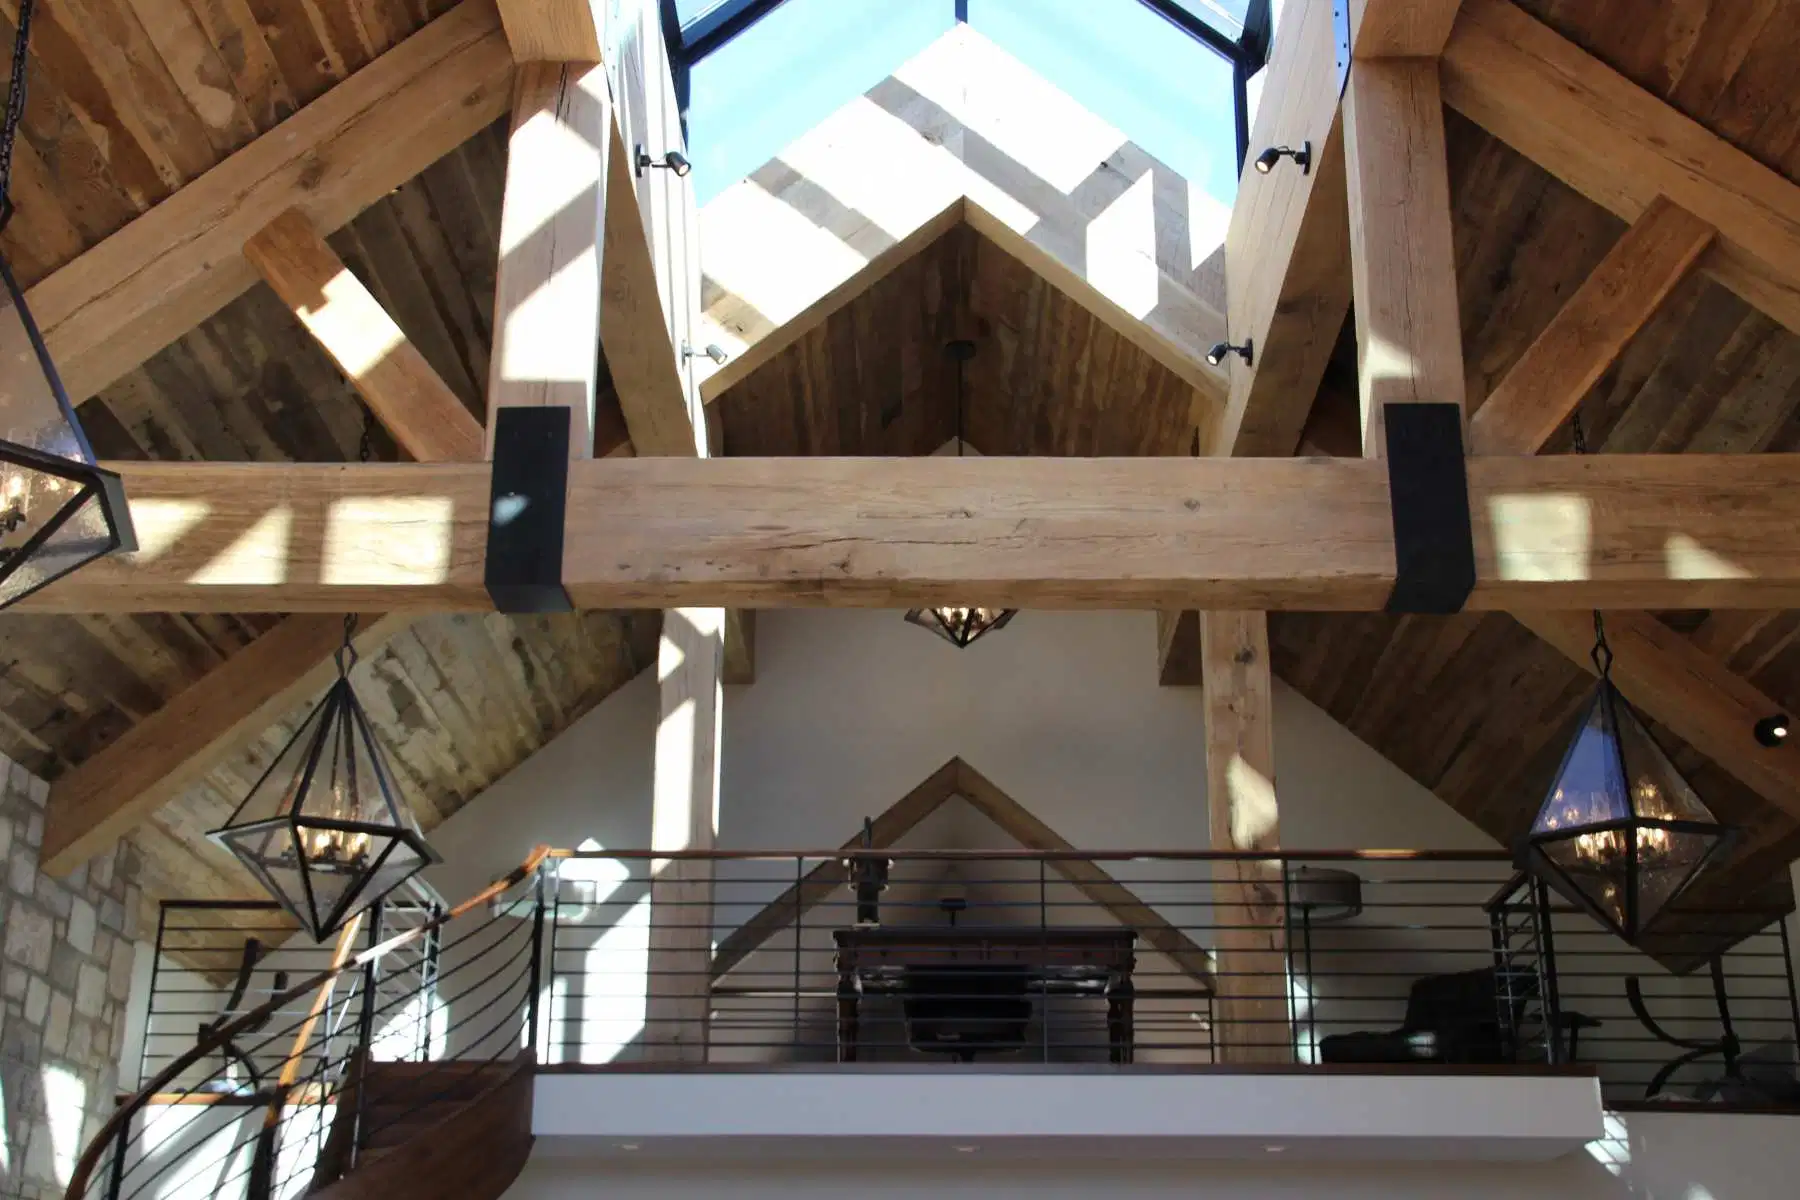 Queen Post style timber trusses